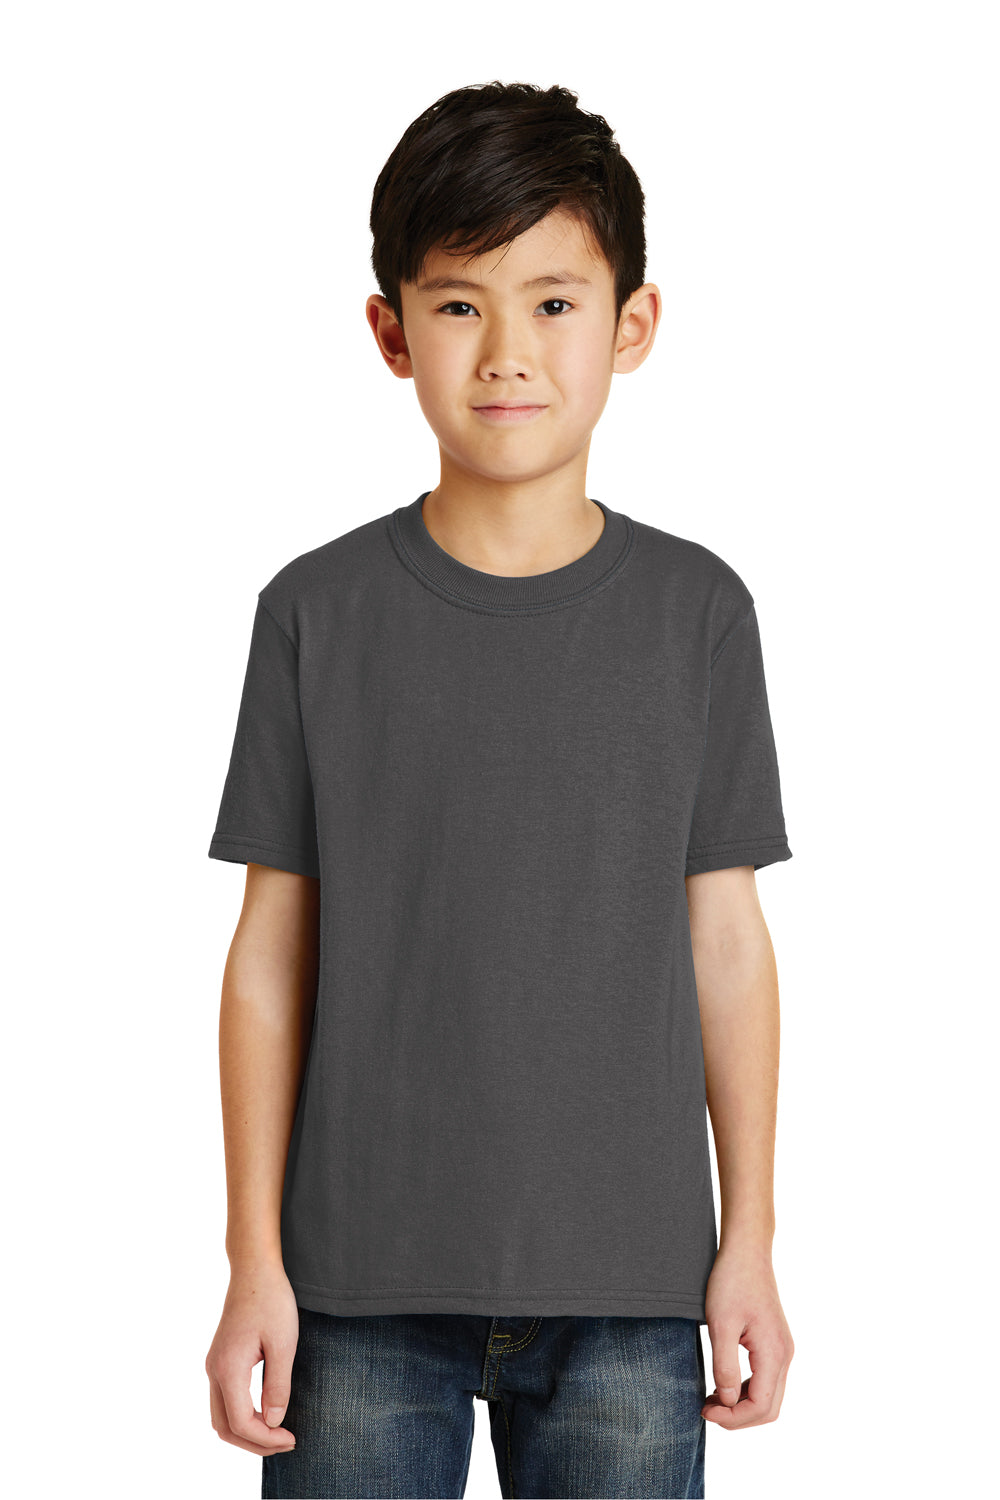 Port & Company PC55Y Youth Core Short Sleeve Crewneck T-Shirt Charcoal Grey Front